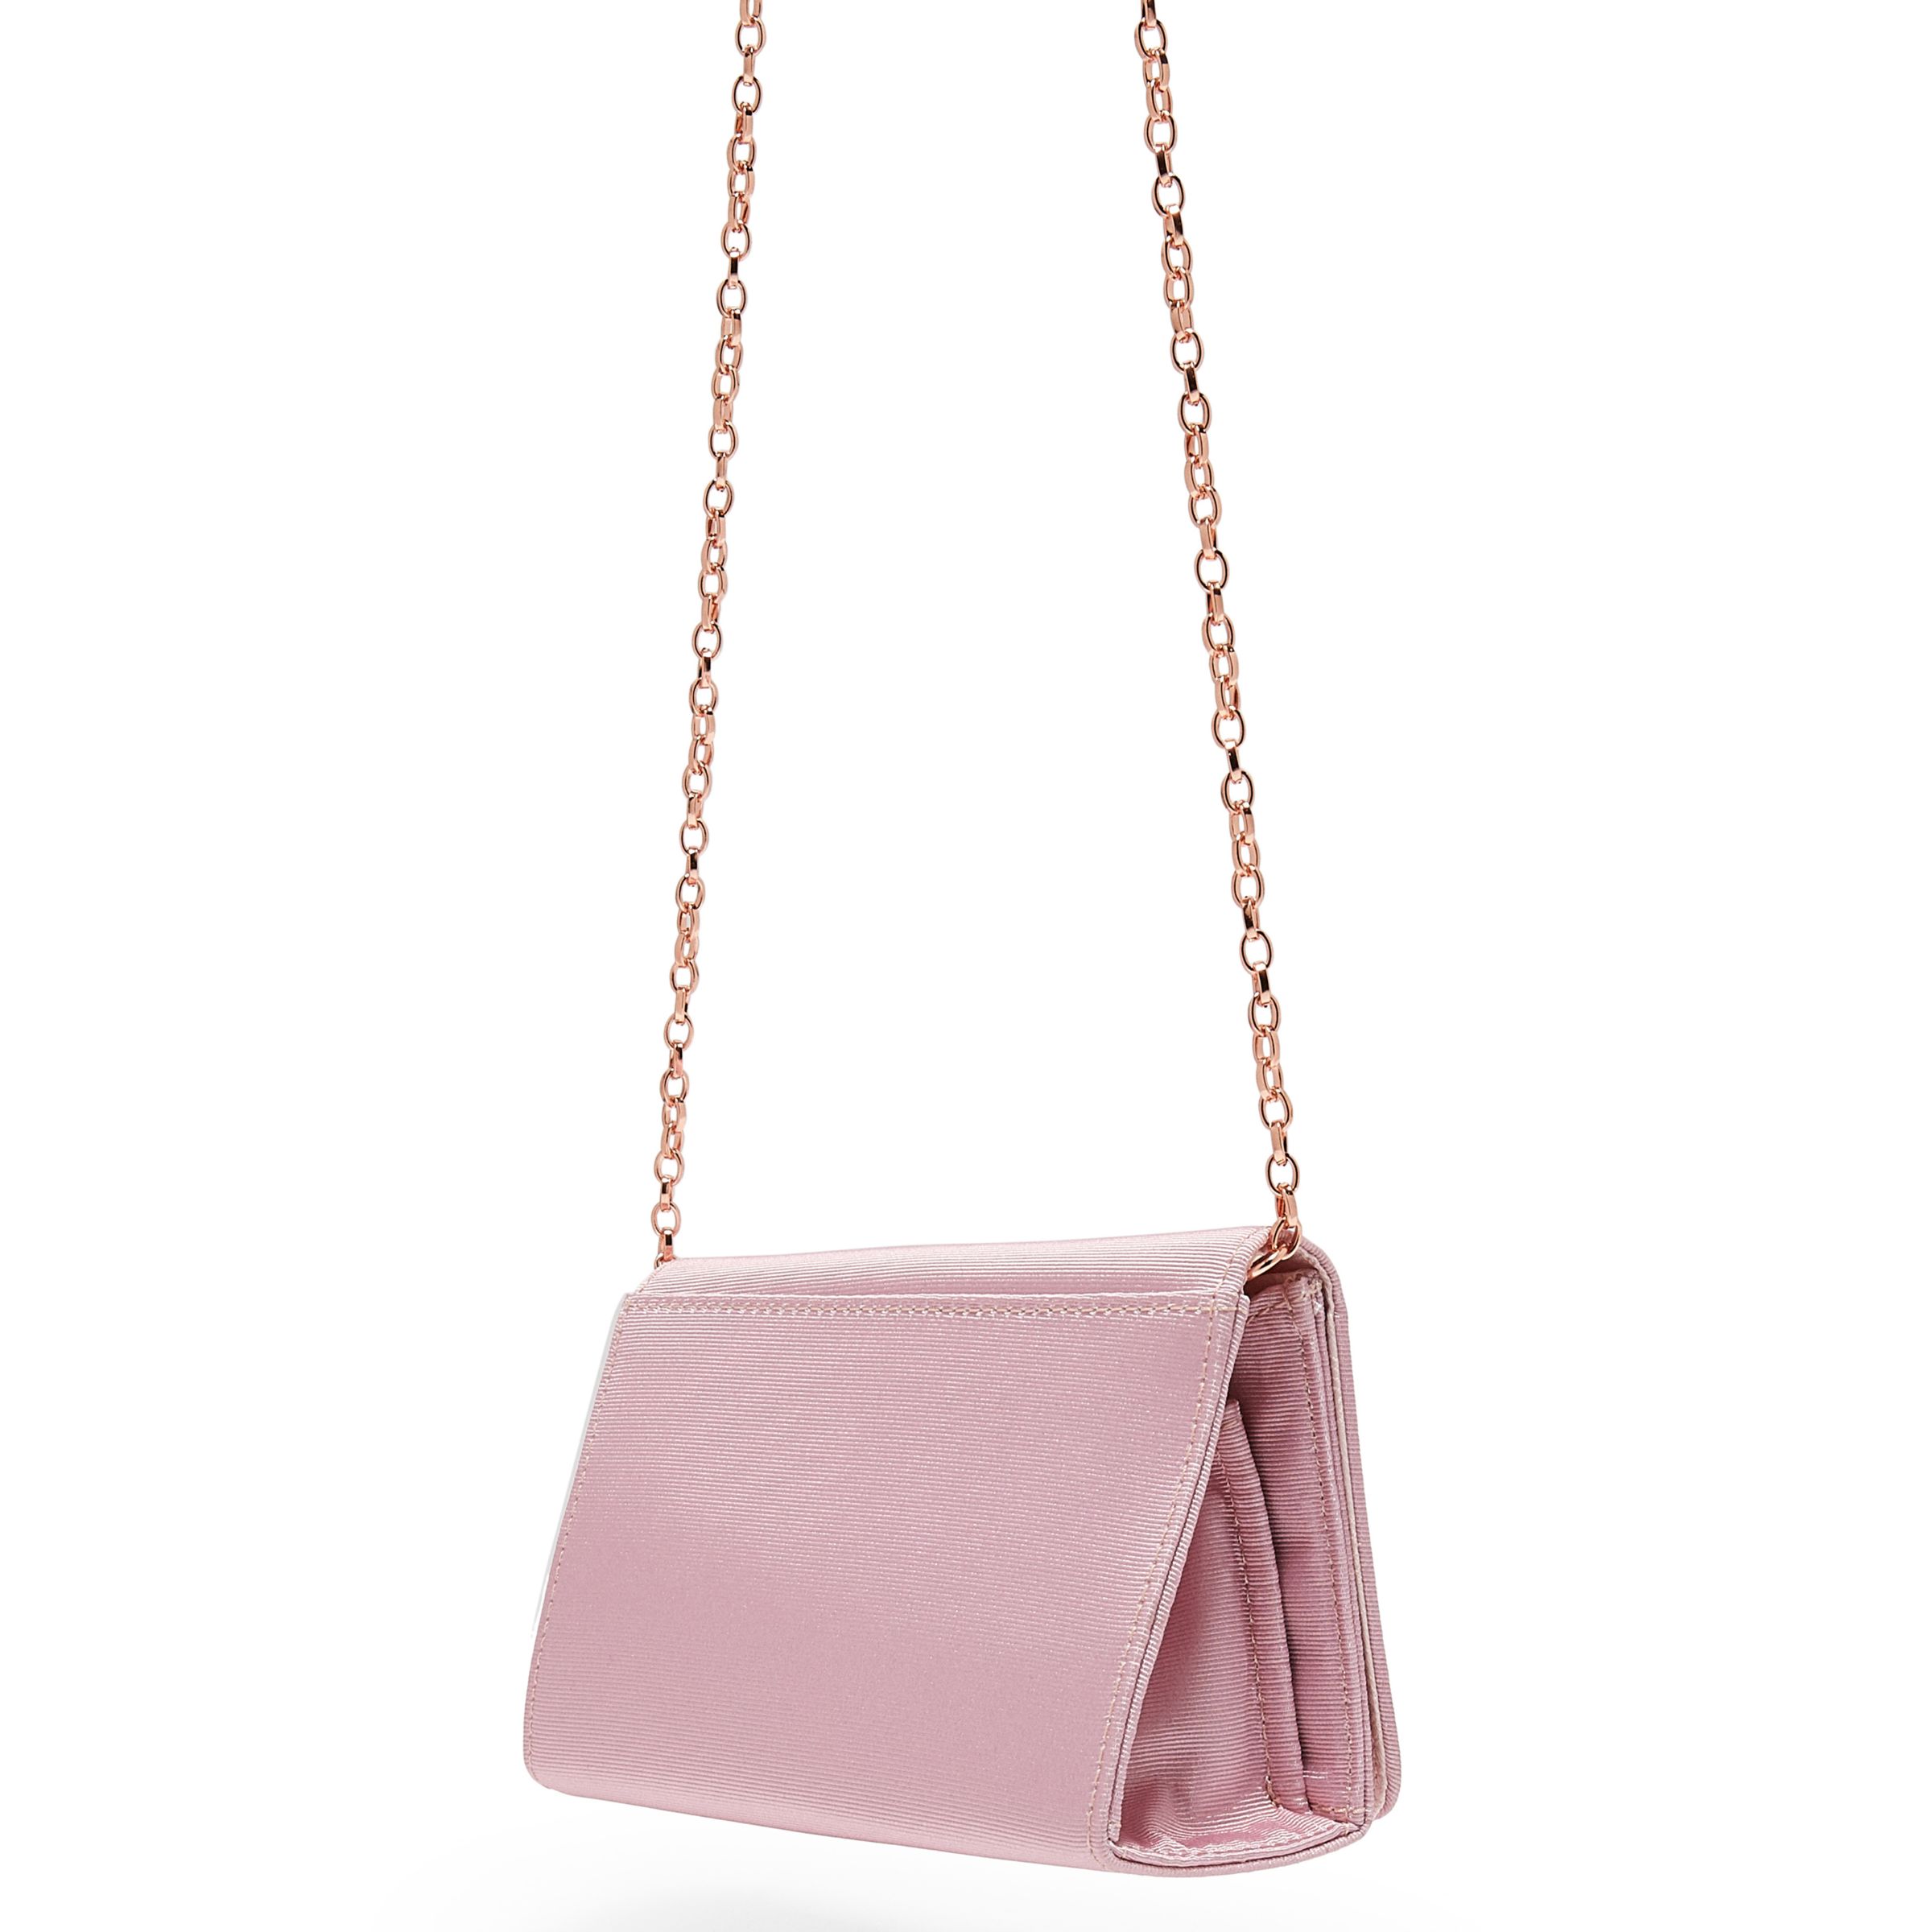 Ted Baker Fiona Harmony Bow Clutch Bag, Pink